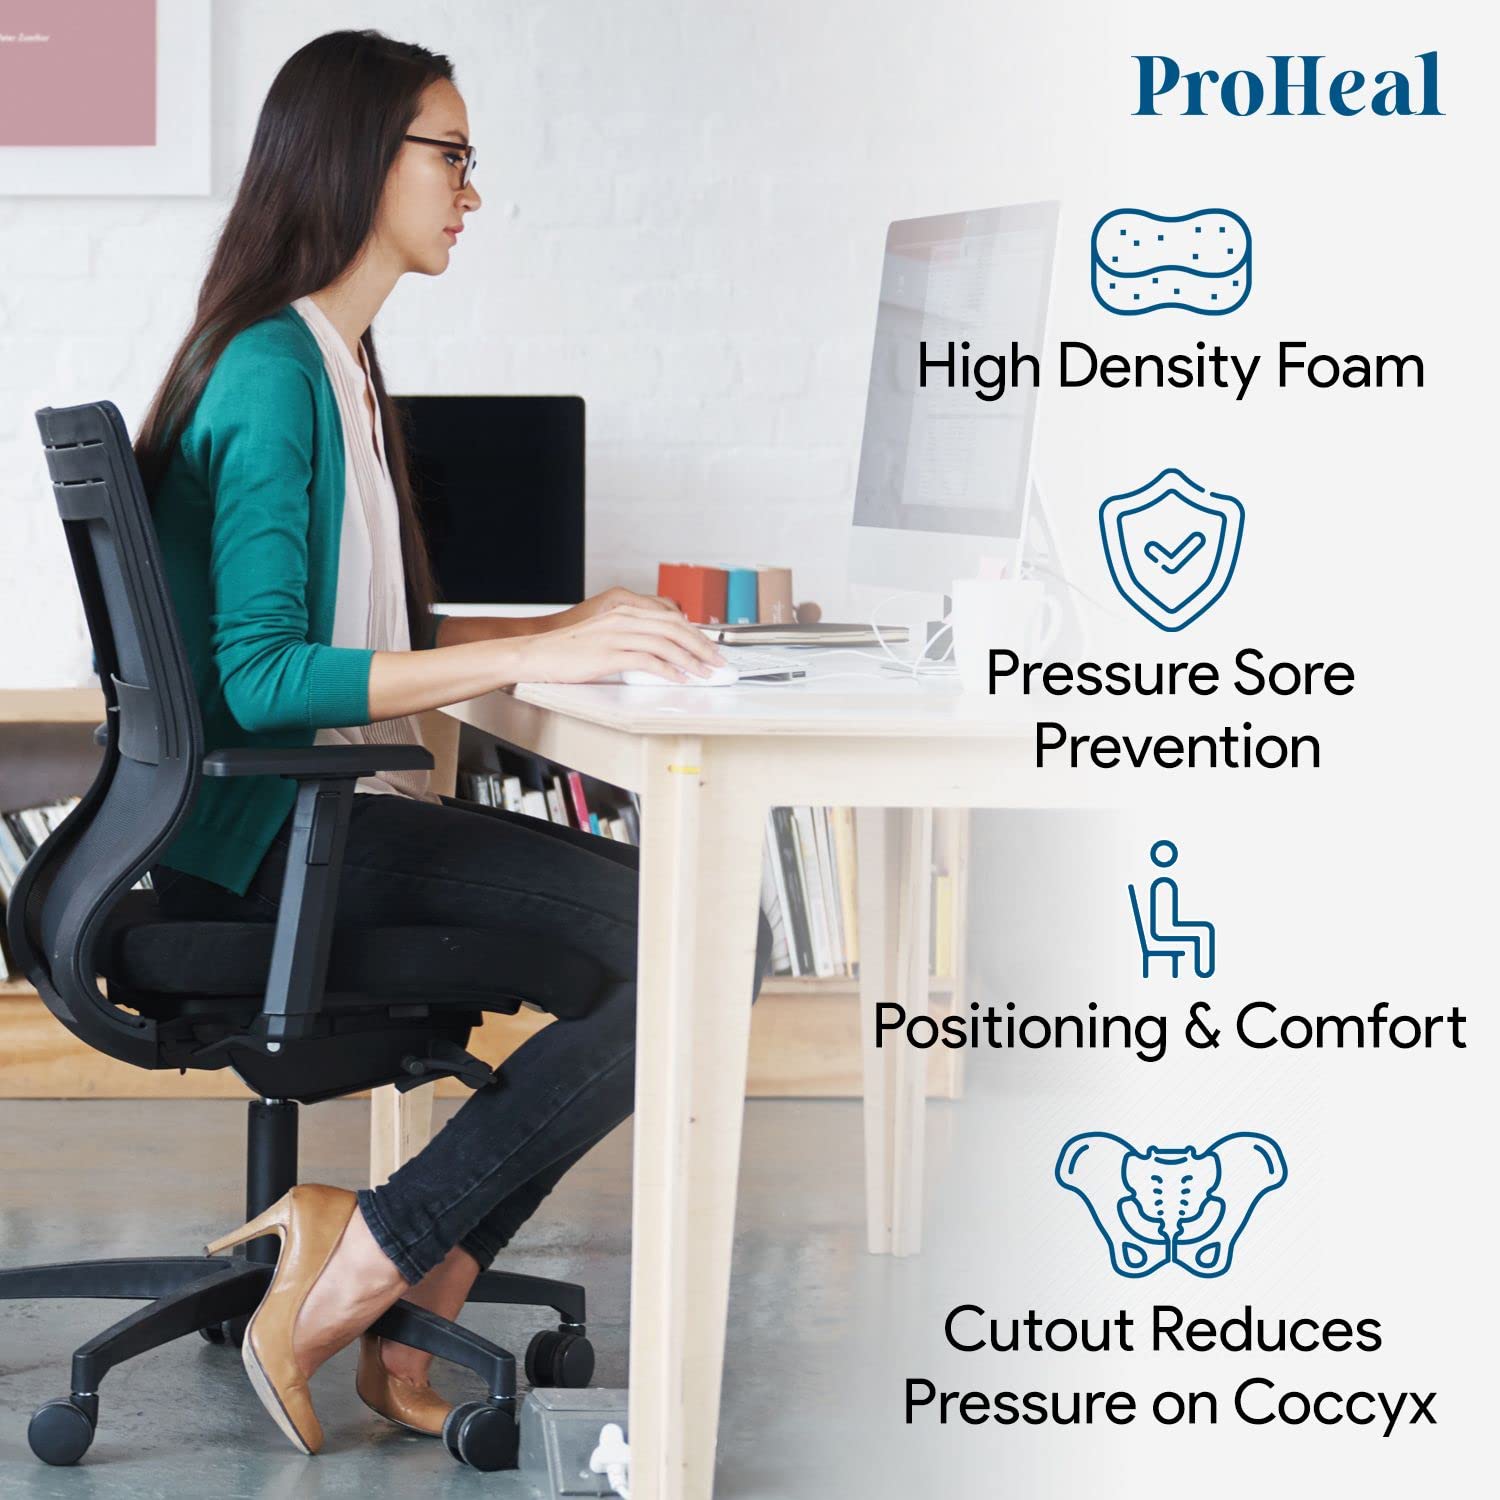 ProHeal Coccyx Foam Wheelchair Cushion 3" Medium Profile - Offers Lower Back Support - Relief for Pressure Sores and Pain - High Density, High Resilient Foam - 1 Year Warranty  - Like New